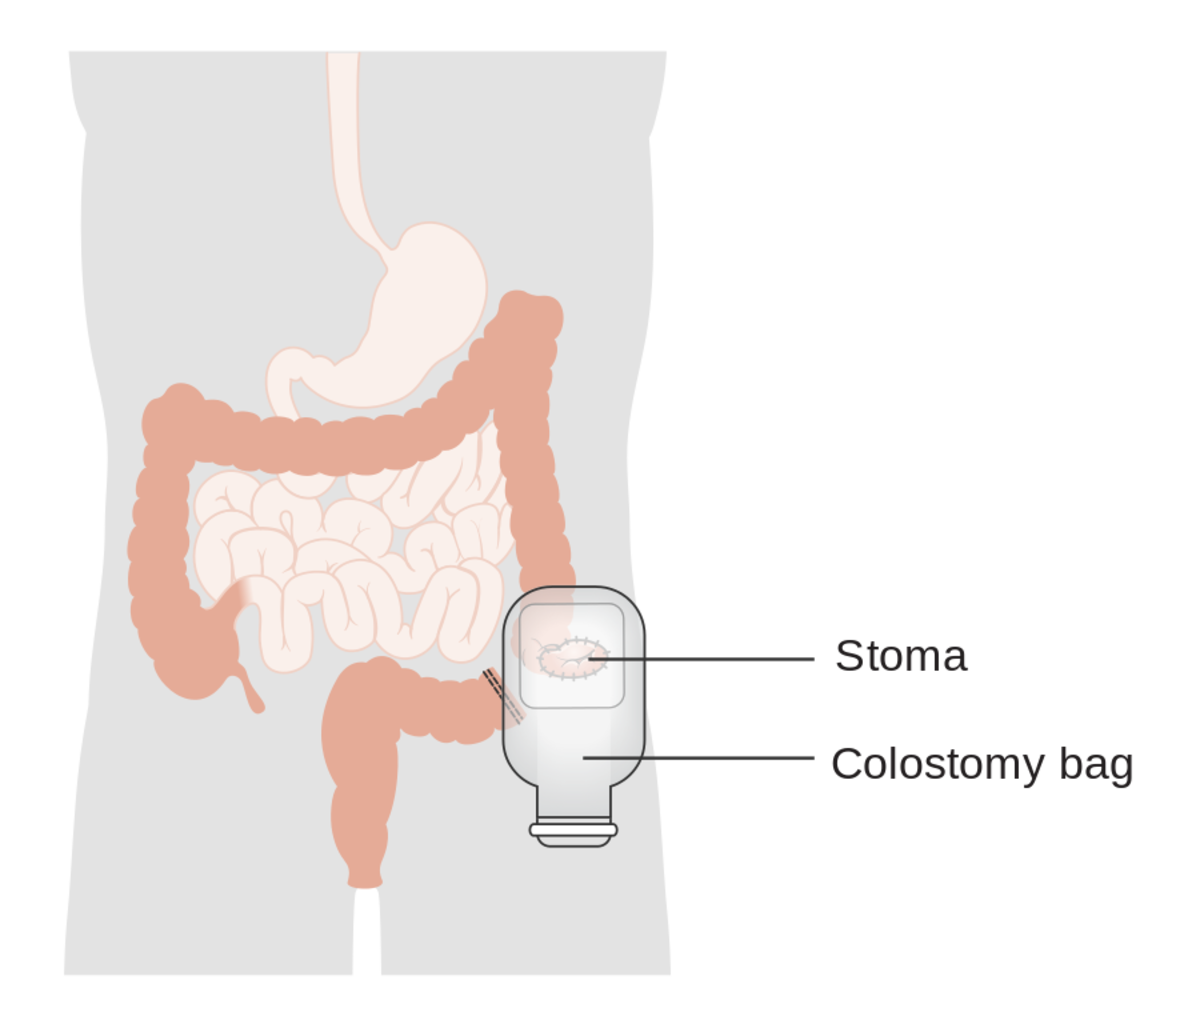 Here are some examples of what having a colostomy bag was like for me. 